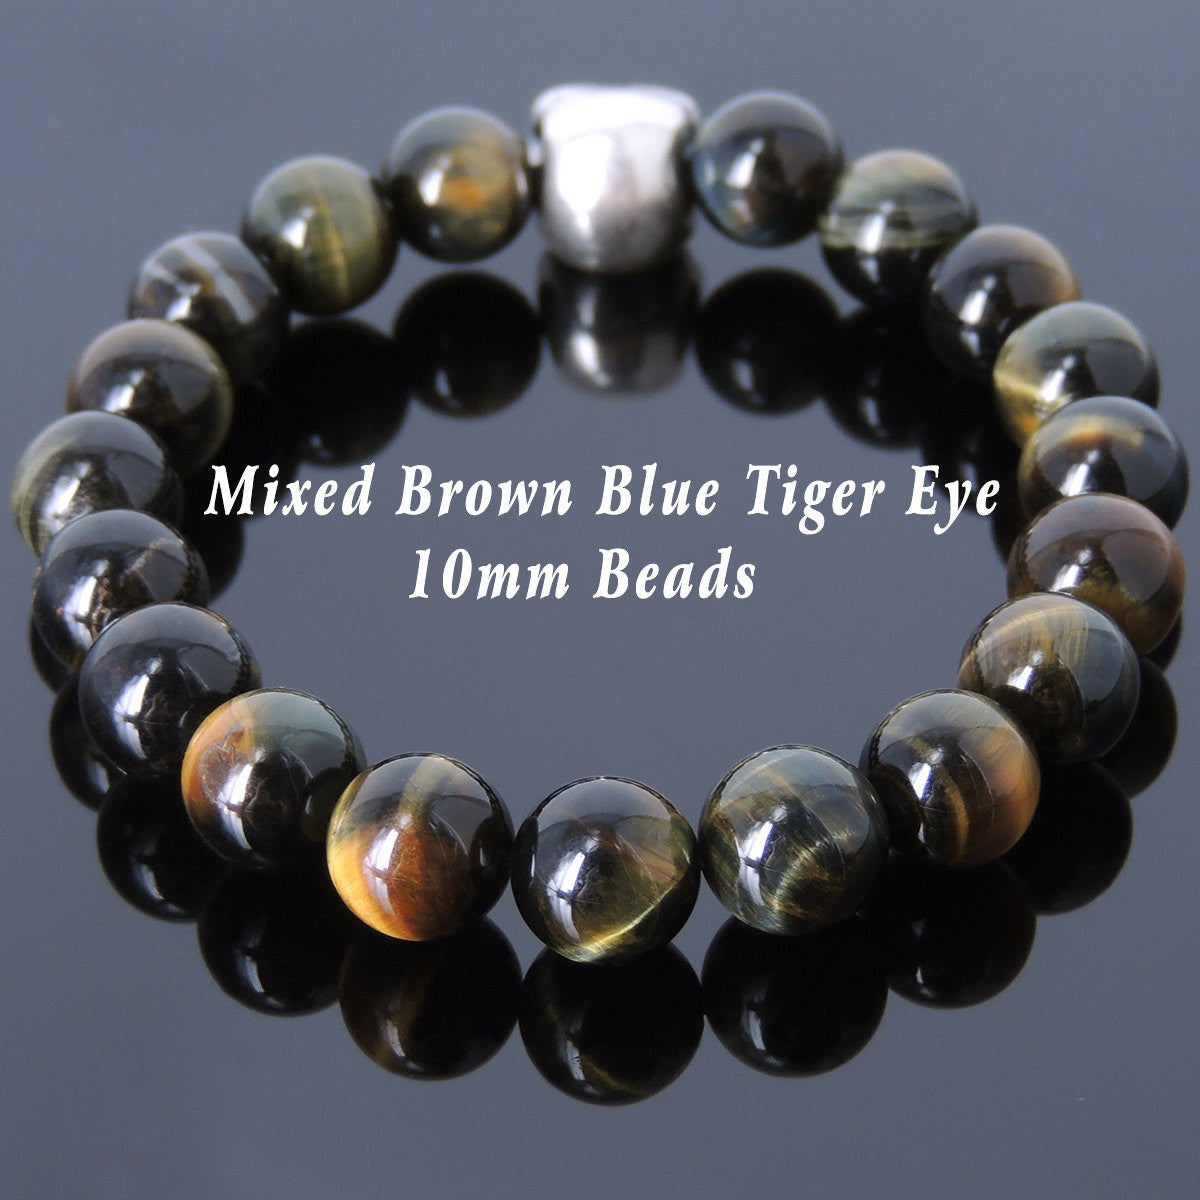 10mm Brown Blue Tiger Eye Healing Gemstone Bracelet with S925 Sterling Silver Protection Skull Charm - Handmade by Gem & Silver BR605